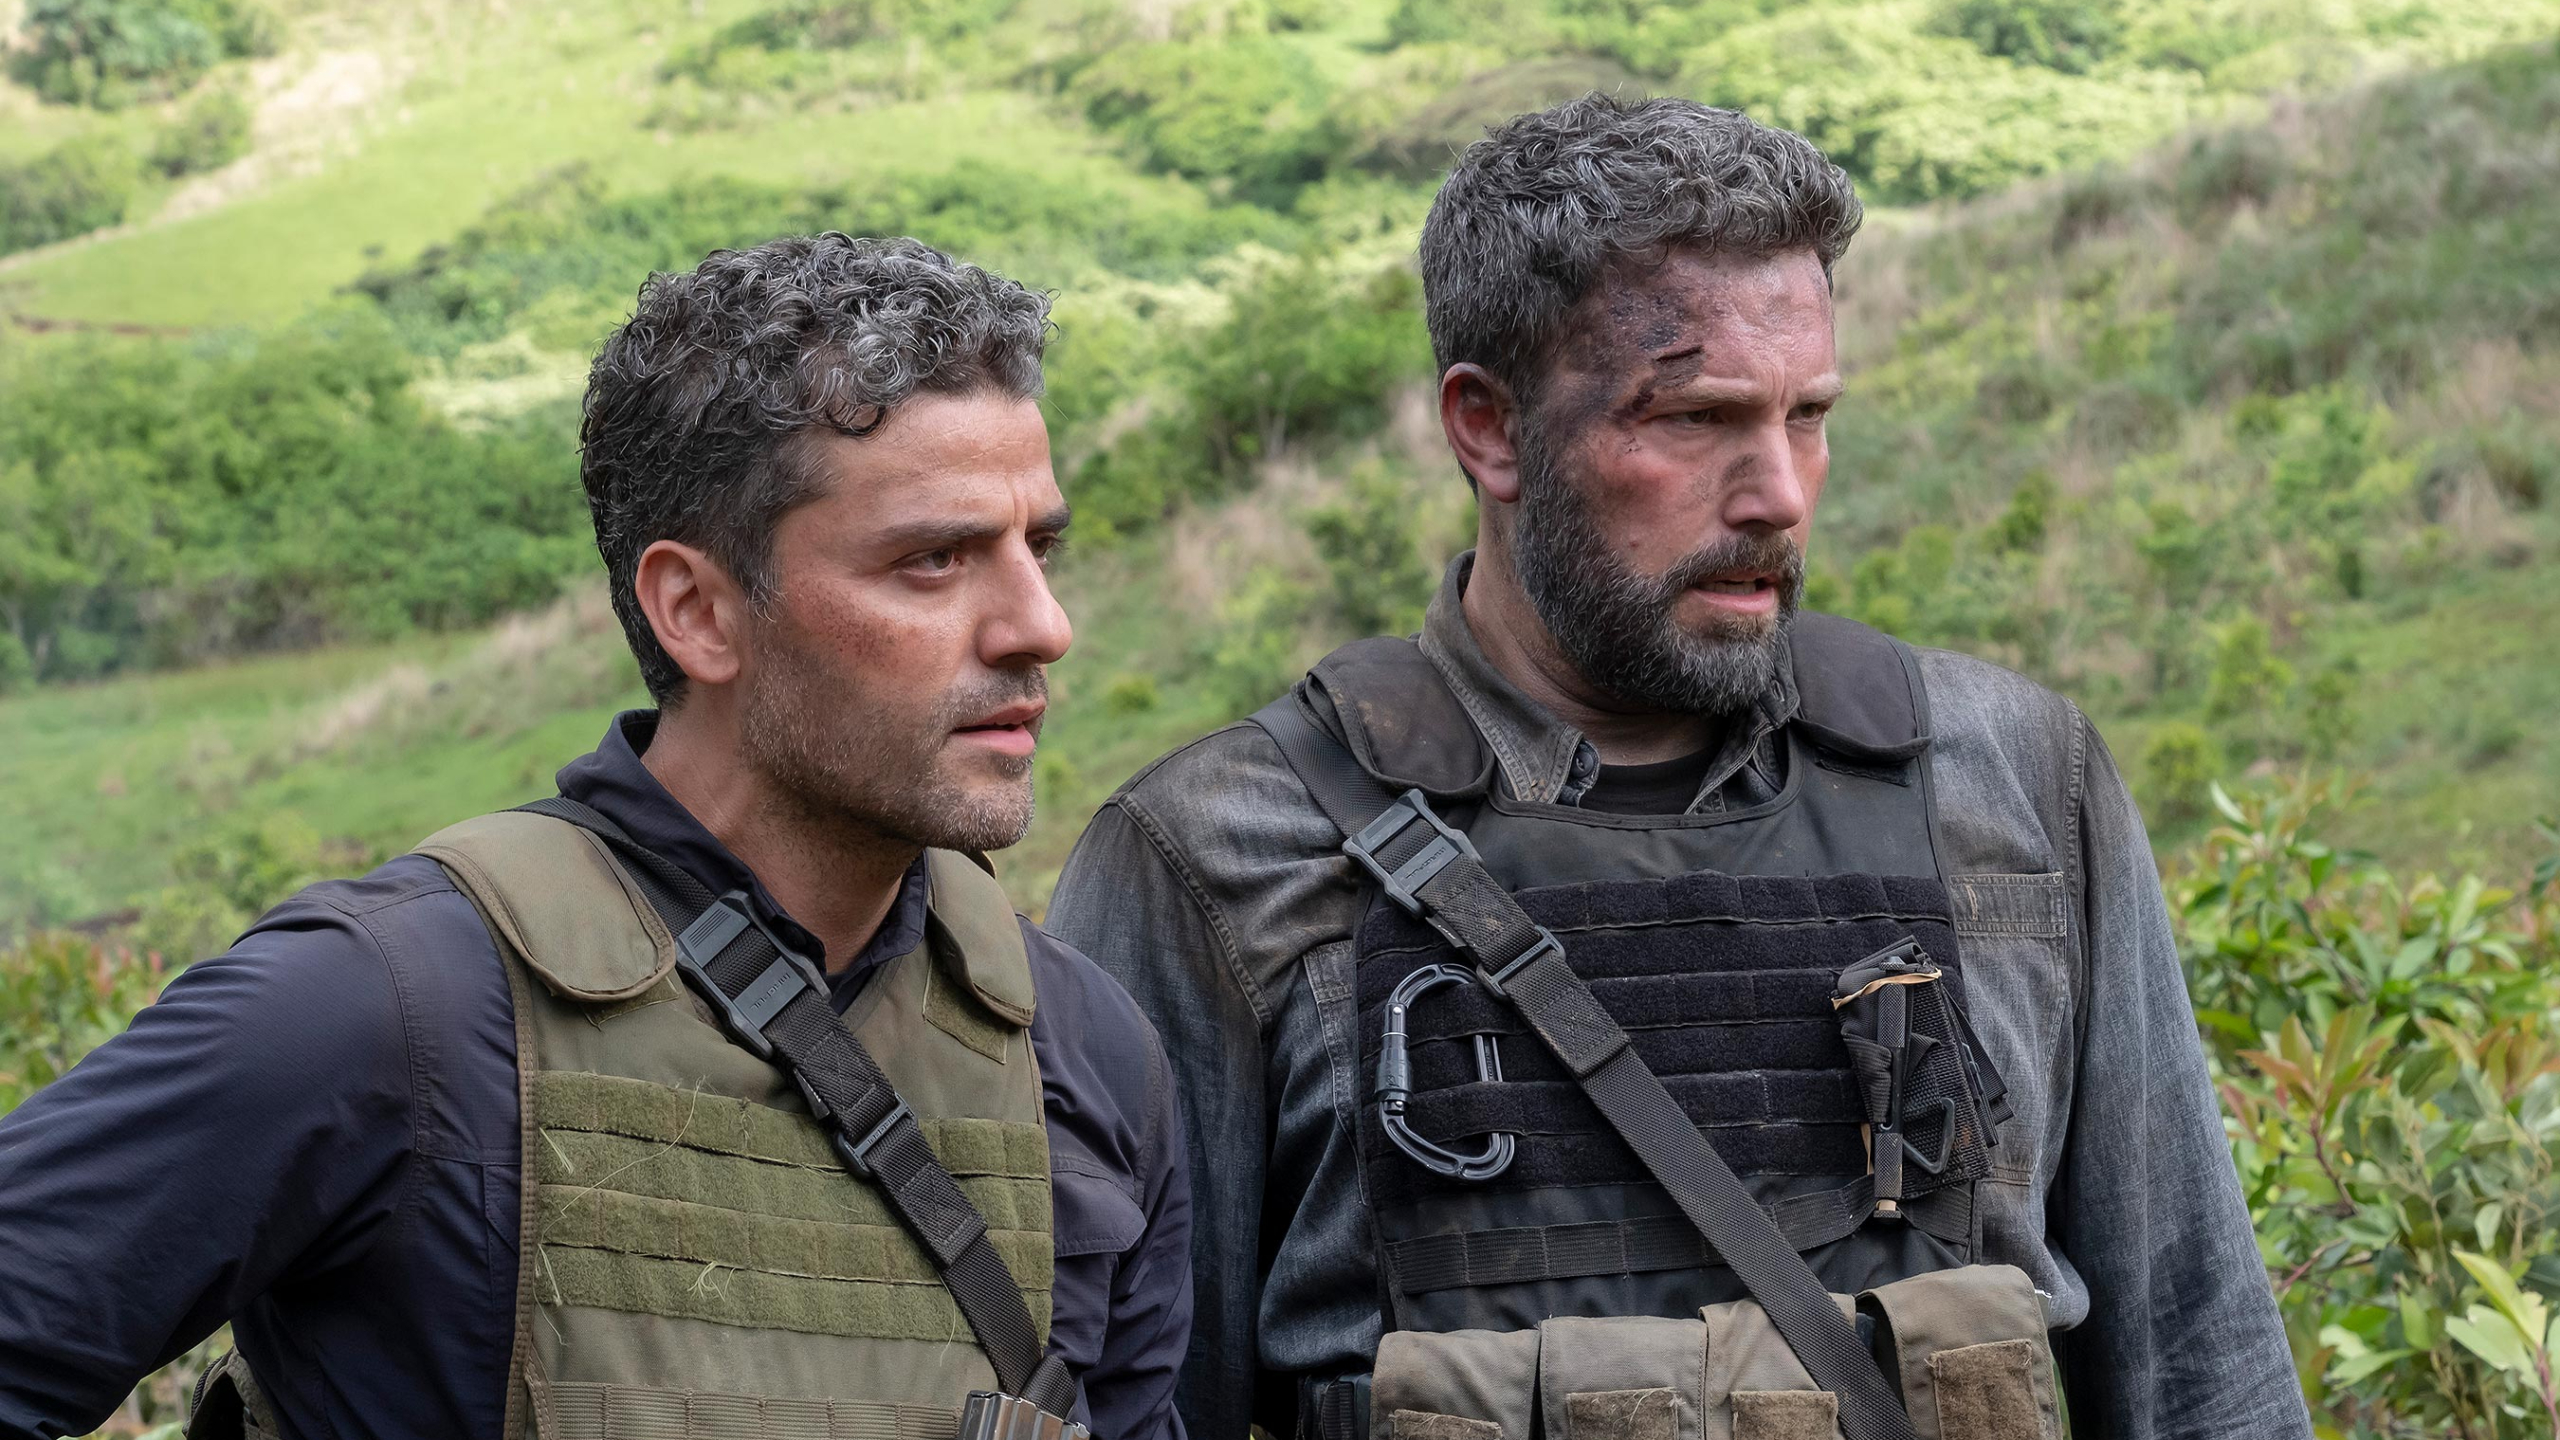 Ben Affleck and Oscar Isaac in Triple Frontier.